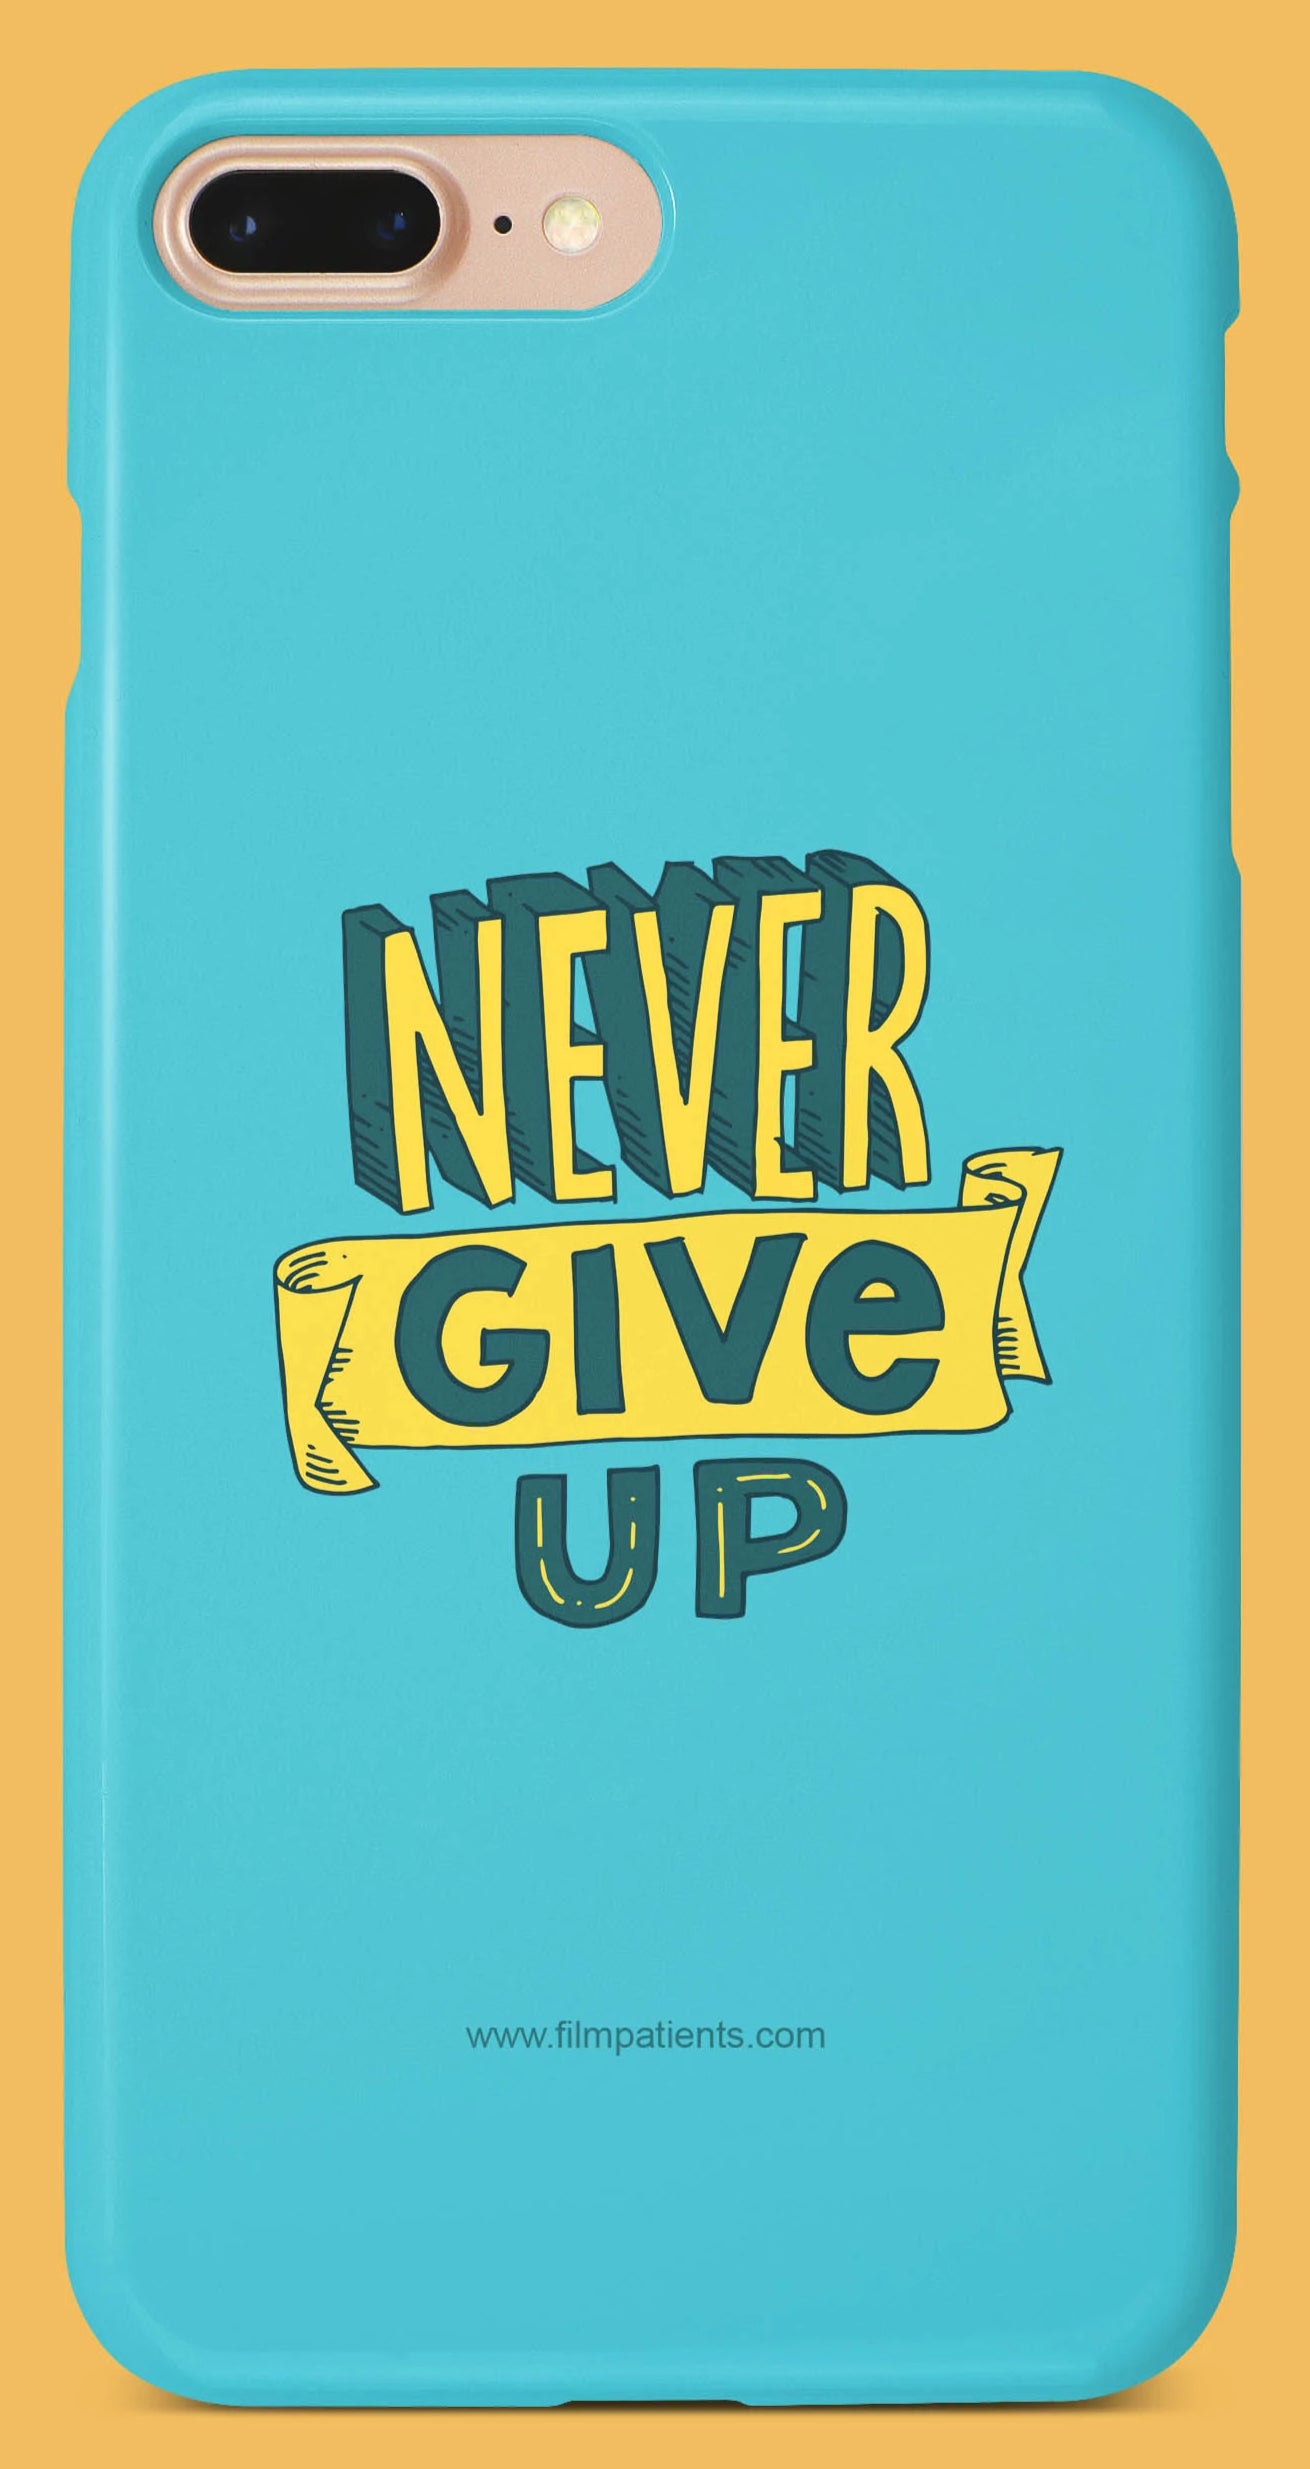 Never Give Up Mobile Cover